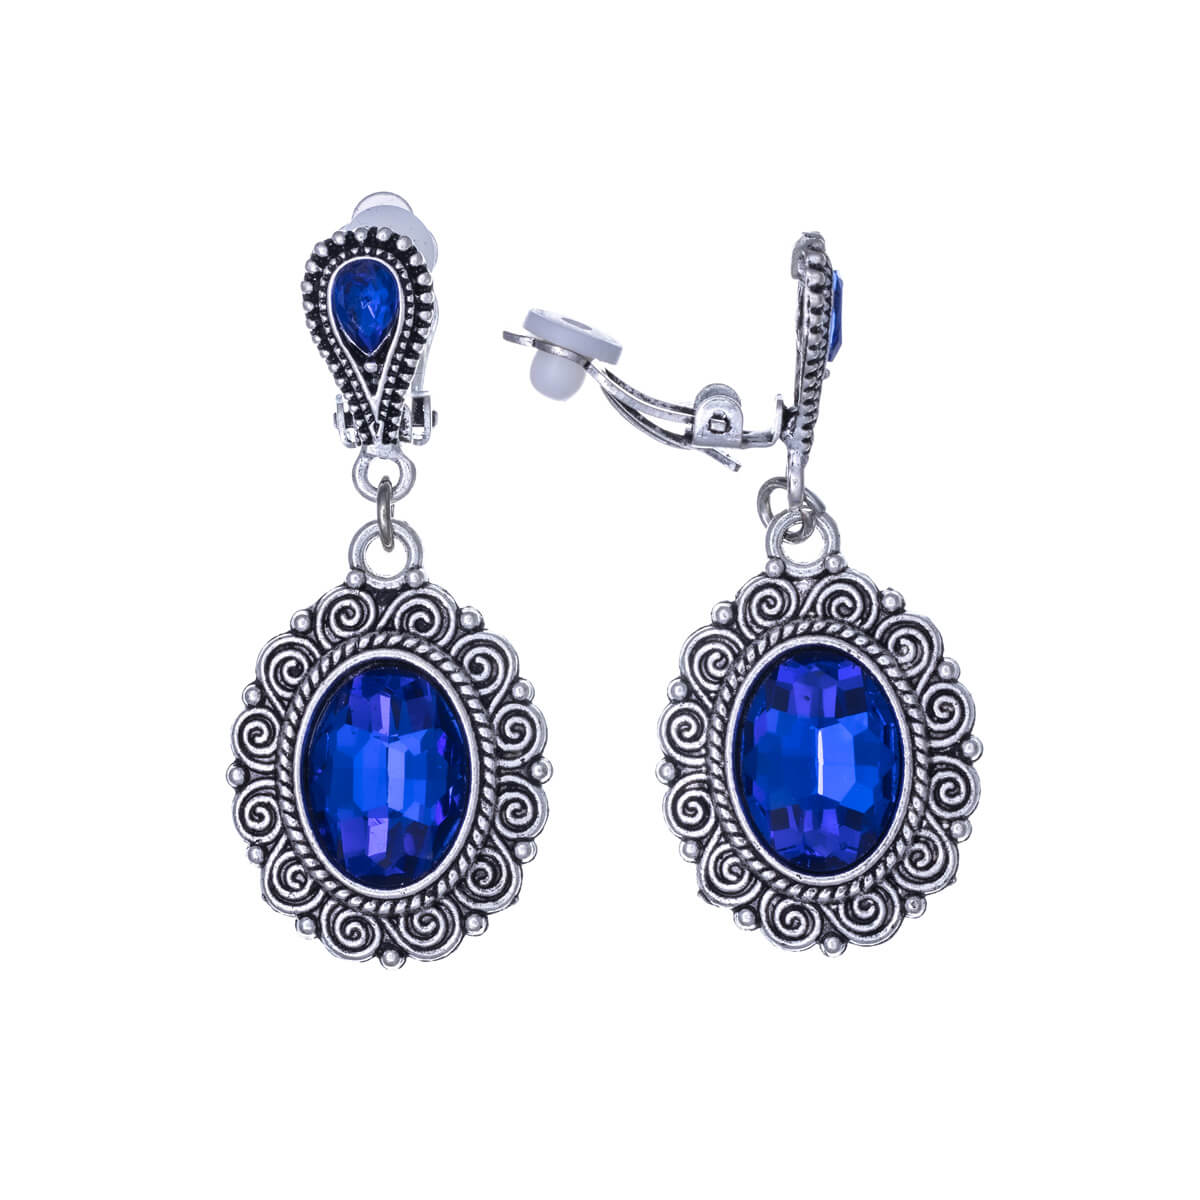 Hanging oval clip-on earrings with glass stones